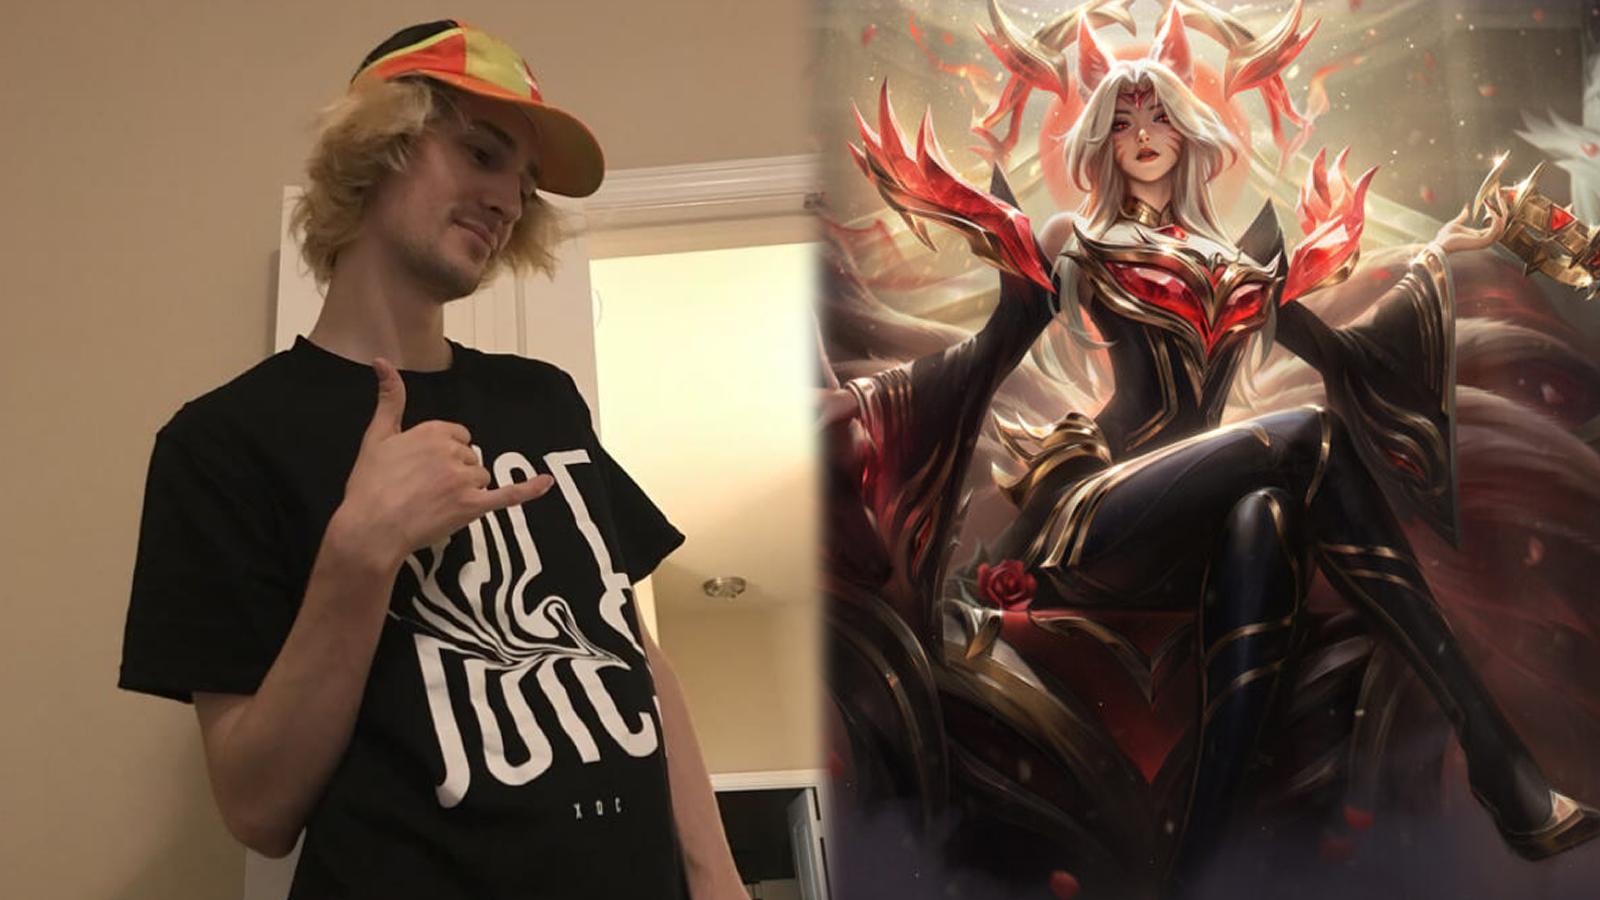 xQc and Faker's Hall of Legends skin